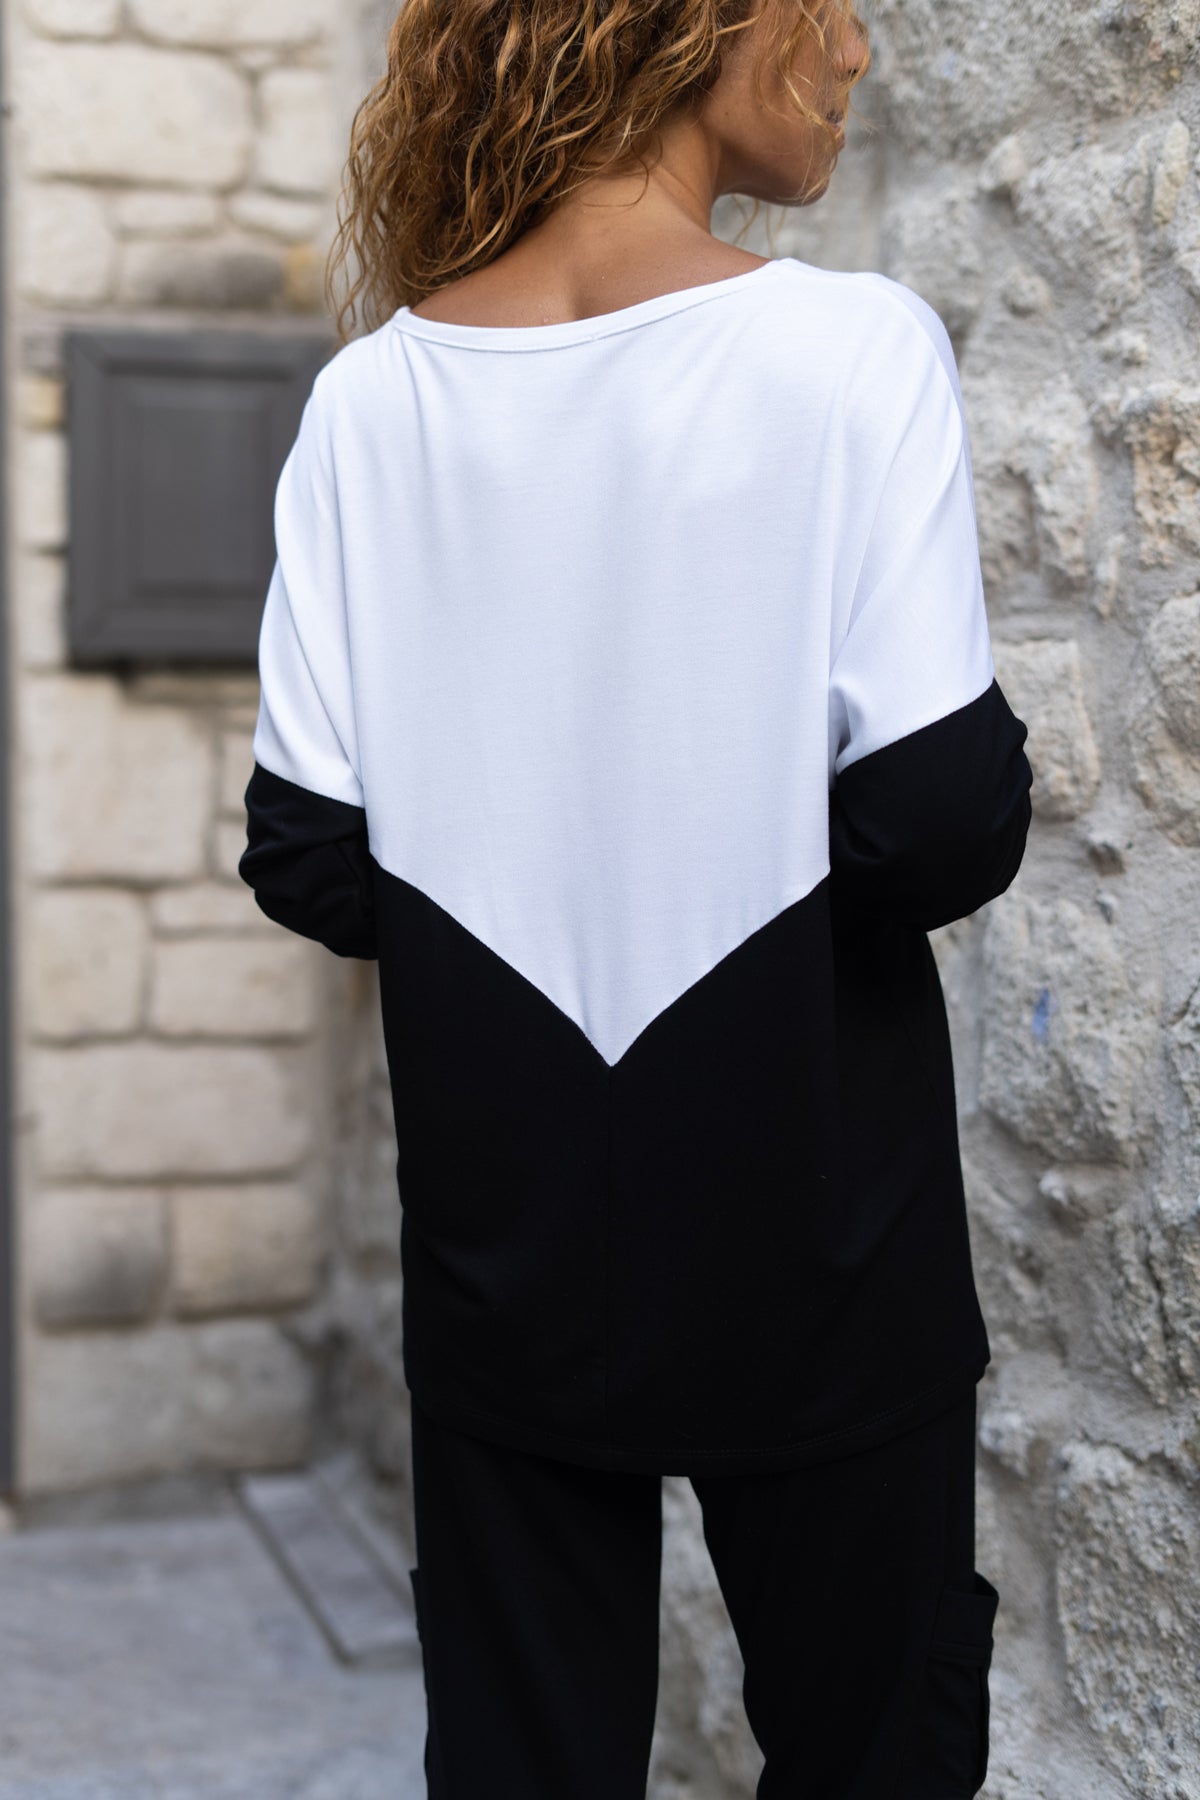 Women's Blouse in White and Black Colors, Comfortable Fit V-Neck and Long Sleeves Soft and Lightweight Fabric